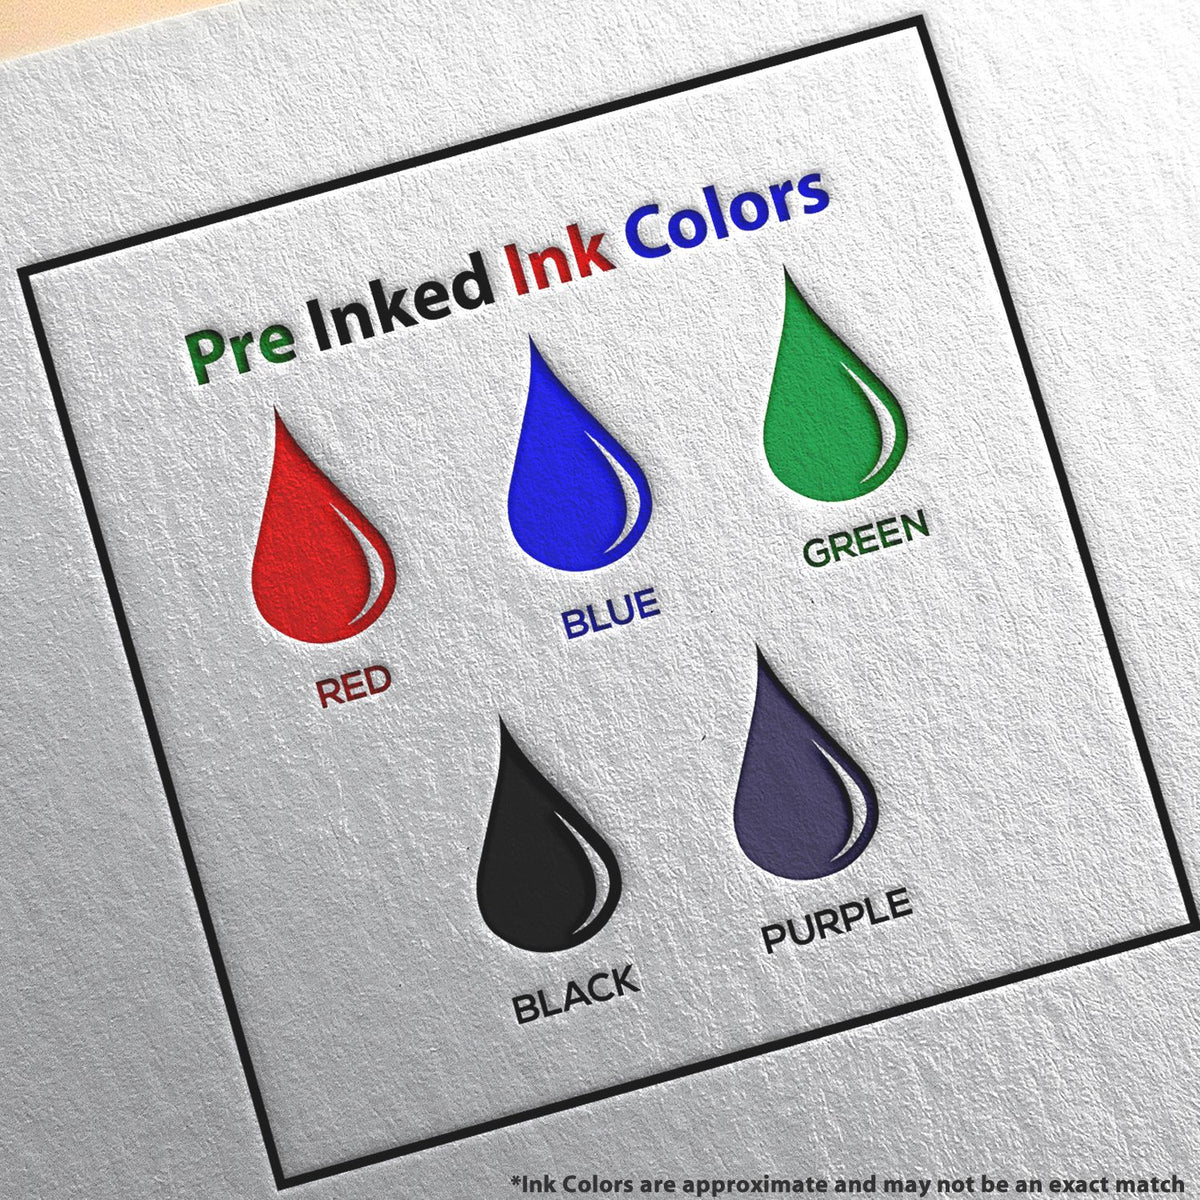 A picture showing the different ink colors or hues available for the Slim Pre-Inked Rectangular Notary Stamp for Guam product.